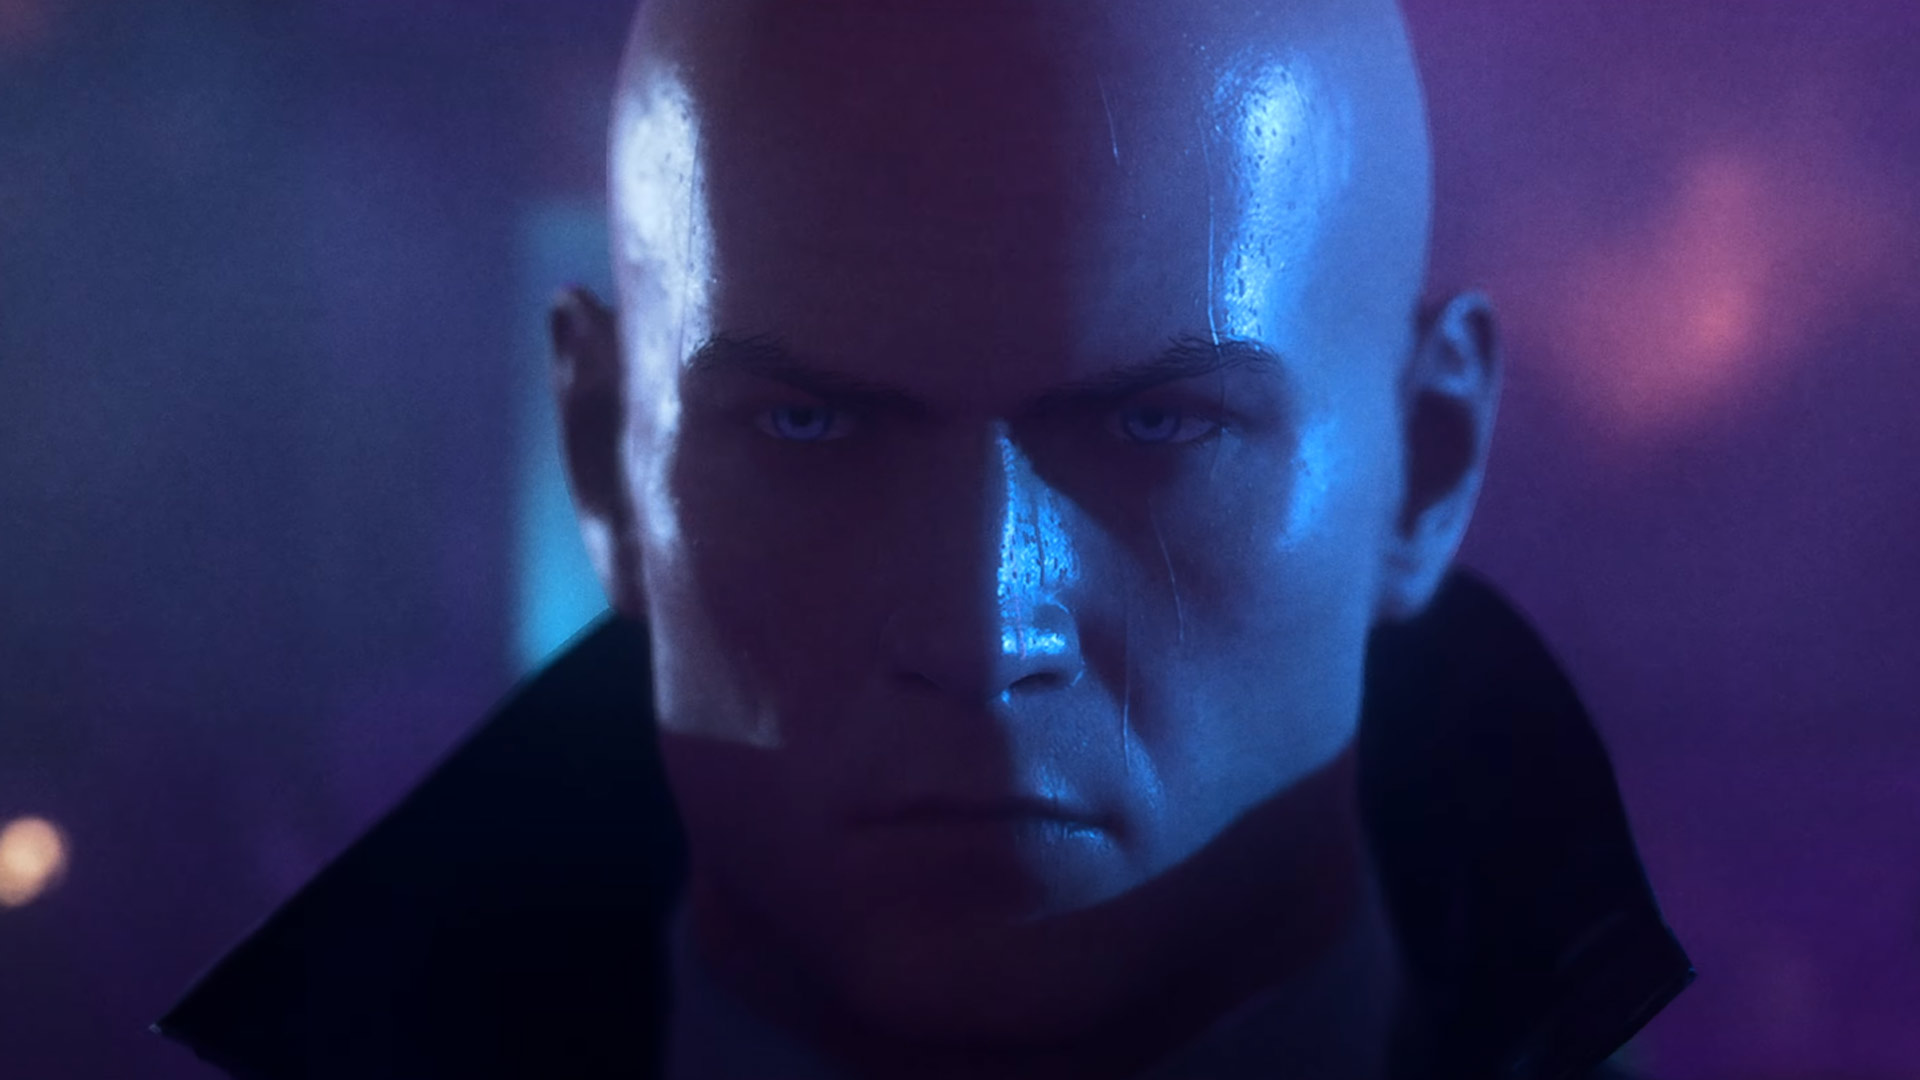 Hitman 3 for Xbox Series X: Release date, gameplay, trailers, and  everything you need to know